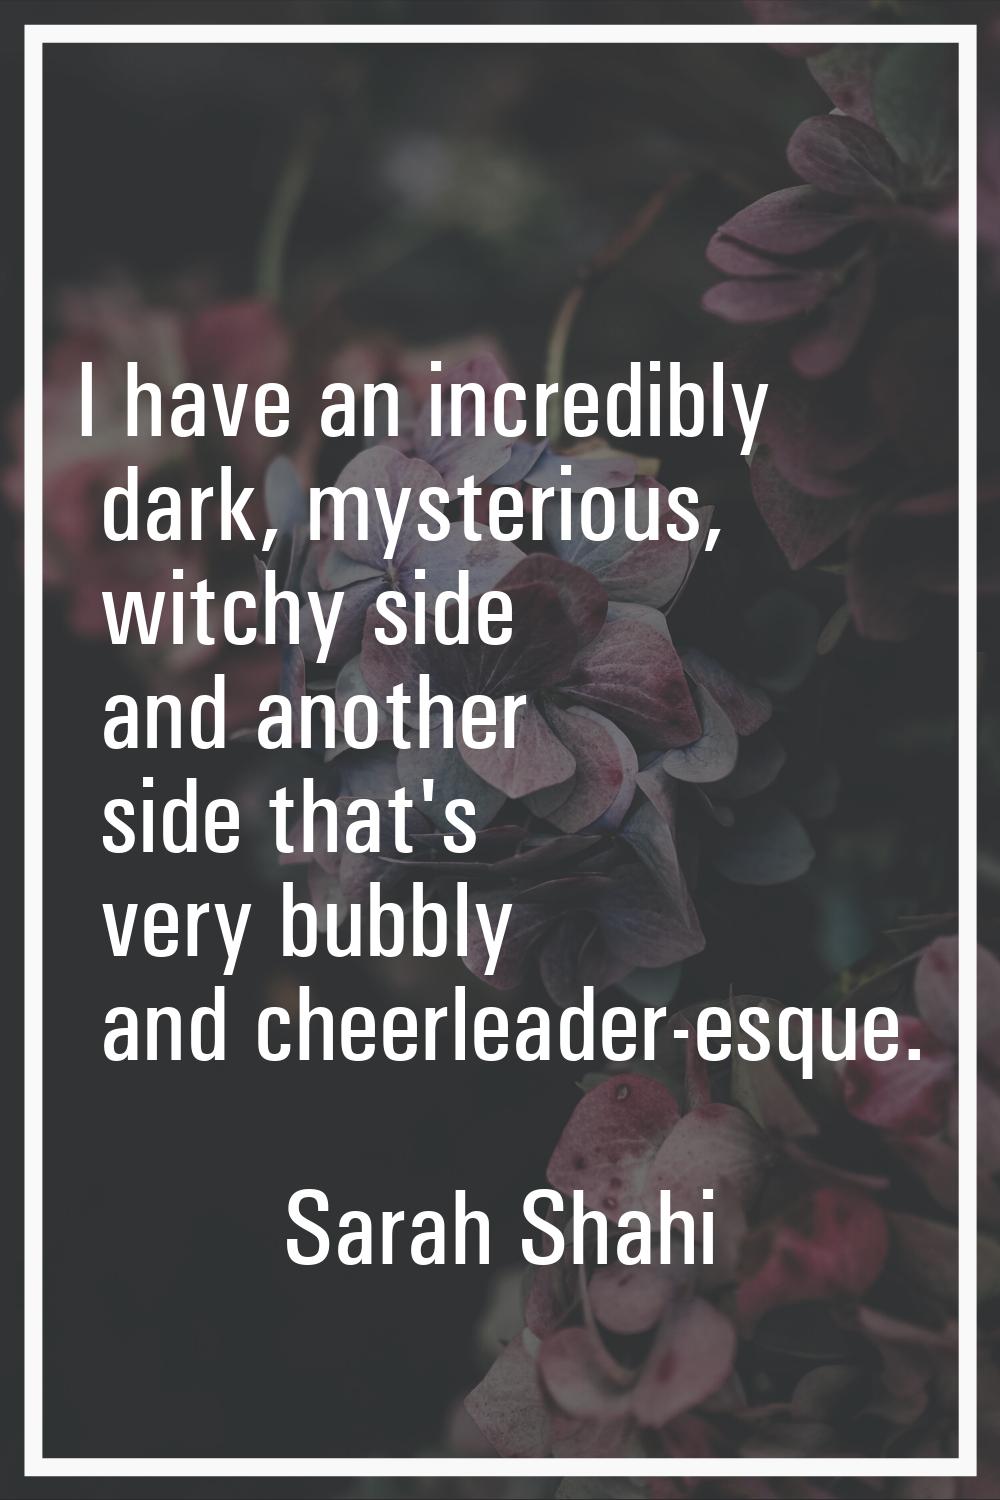 I have an incredibly dark, mysterious, witchy side and another side that's very bubbly and cheerlea